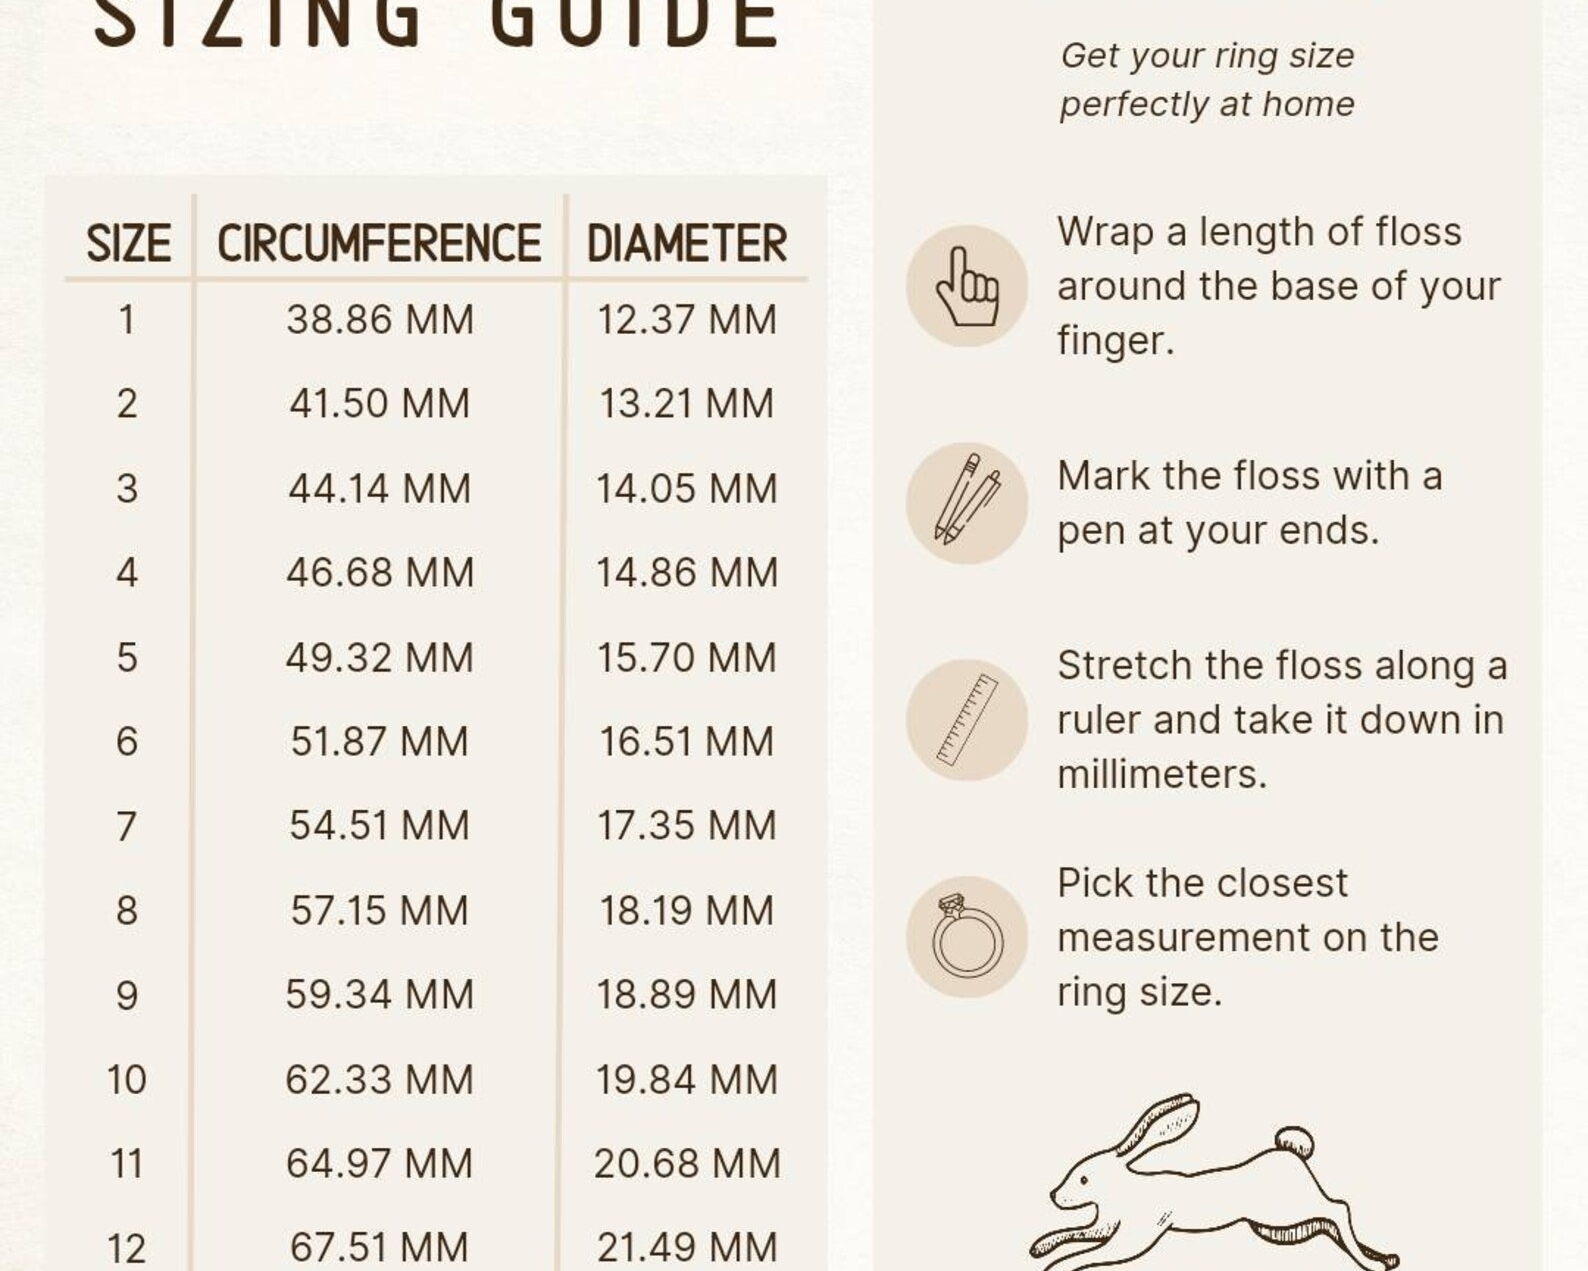 Ring Size Chart with Instructions. Wrap a length of floss around your finger. Mark the floss with a pen. Lay the floss along a ruler and record the millimeter measurement. Pick the closest measurement on the ring size chart.